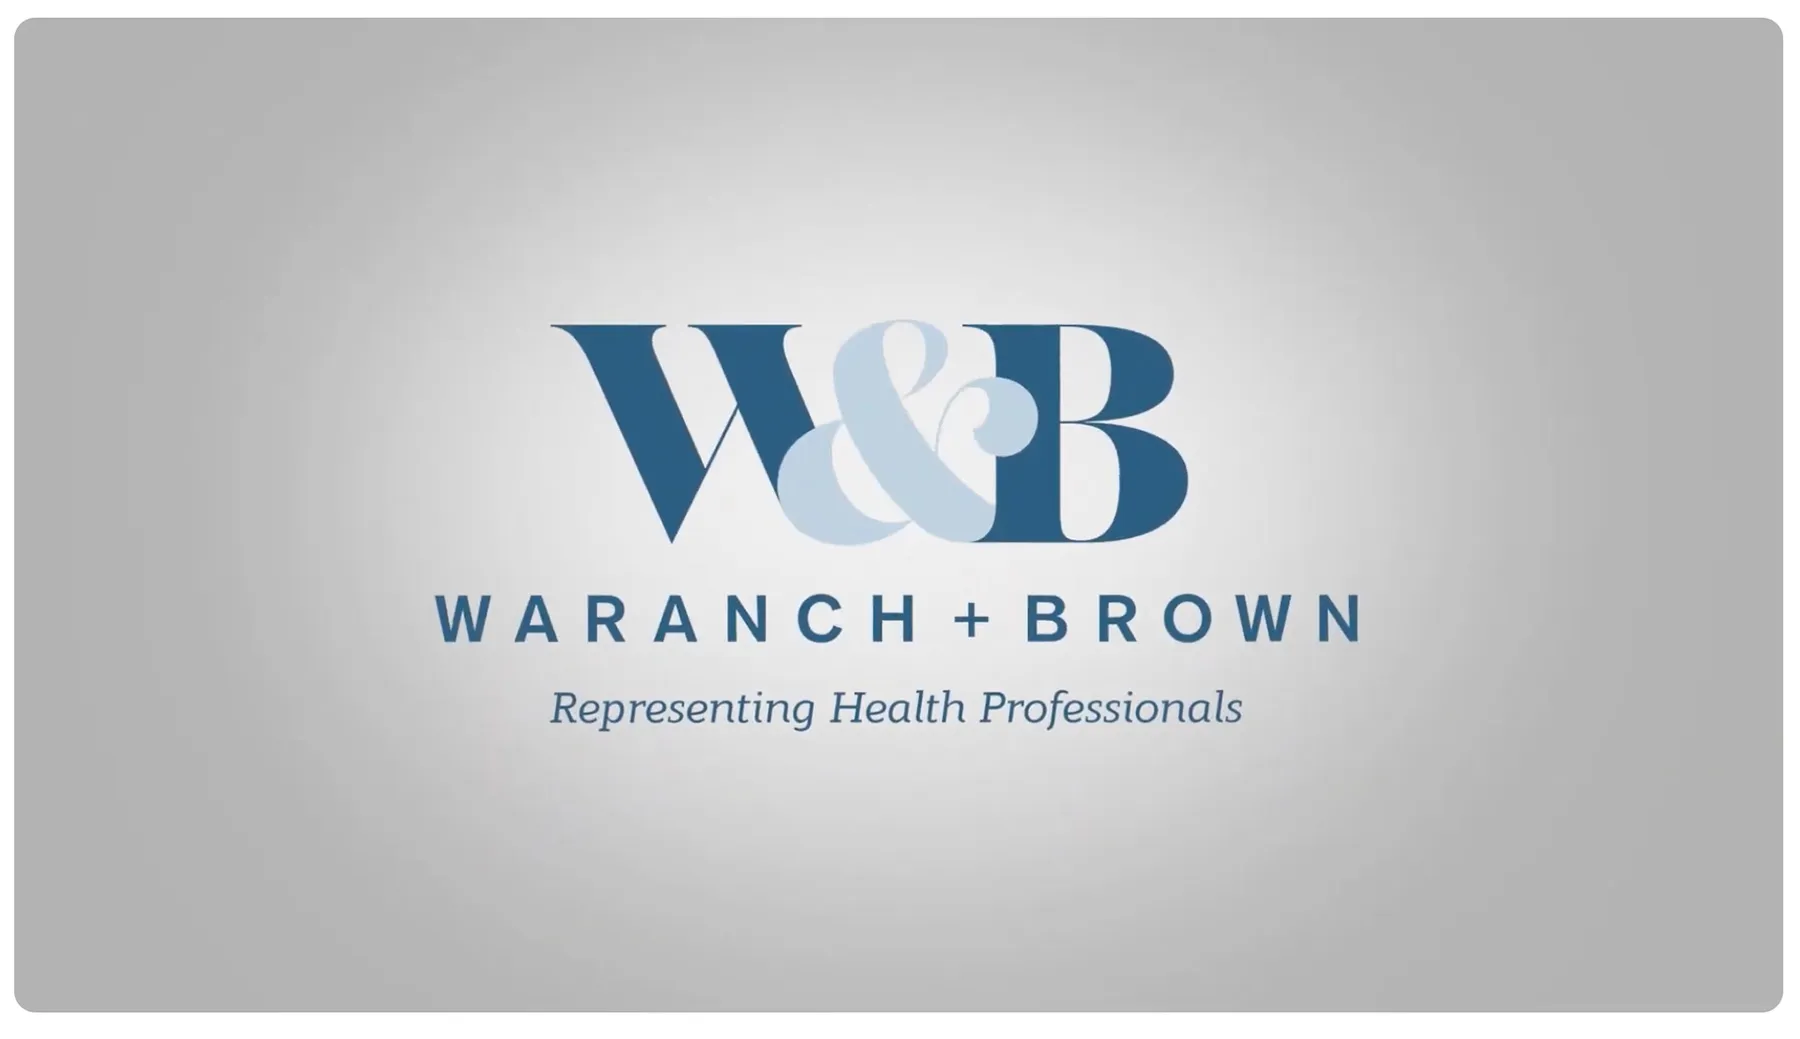 Waranch & Brown: Representing Health Professionals Video. Click to play video.